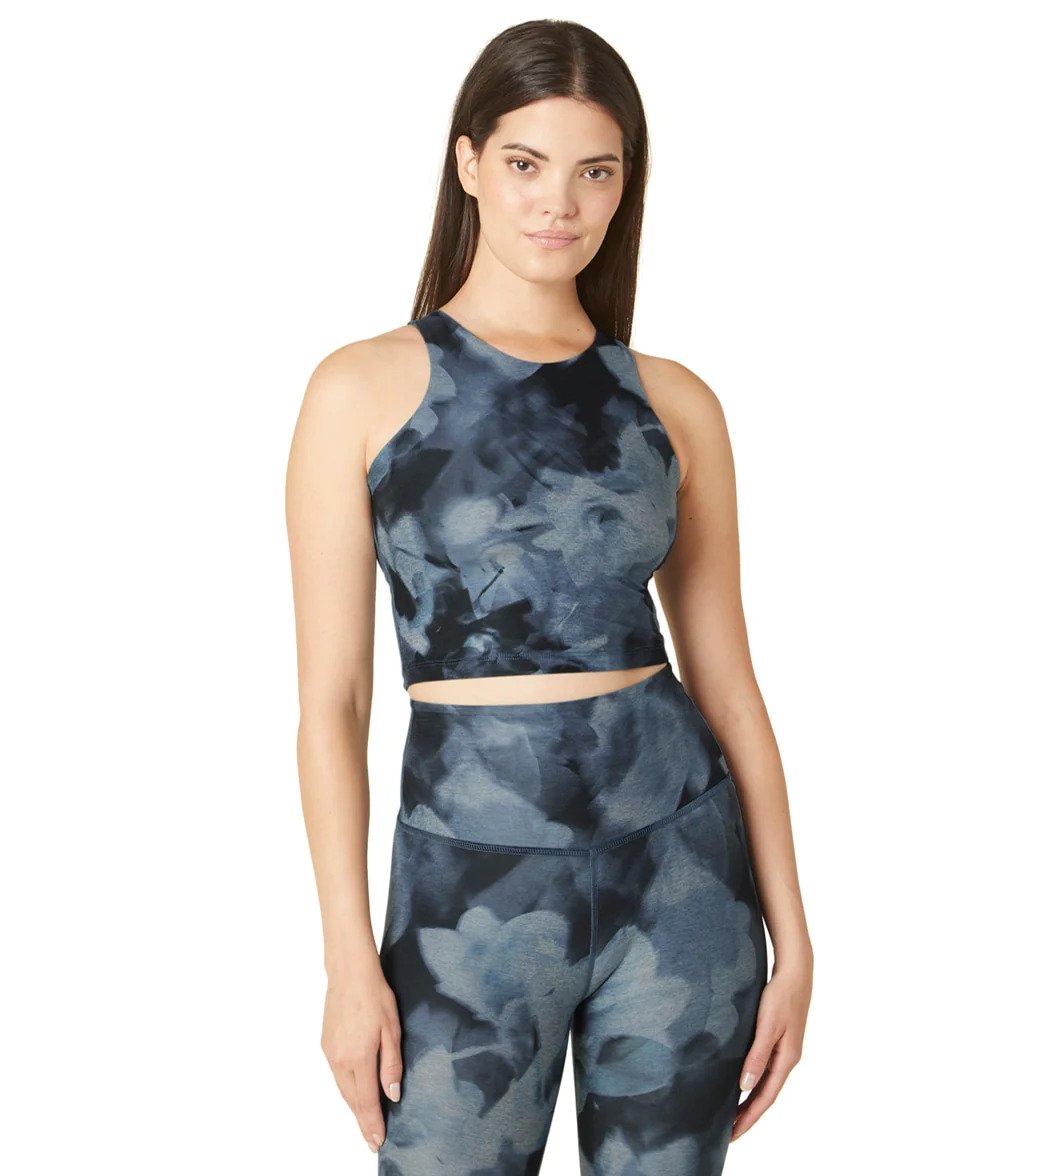 Women's Ethereal Floral SoftMark Focus Cropped Tank